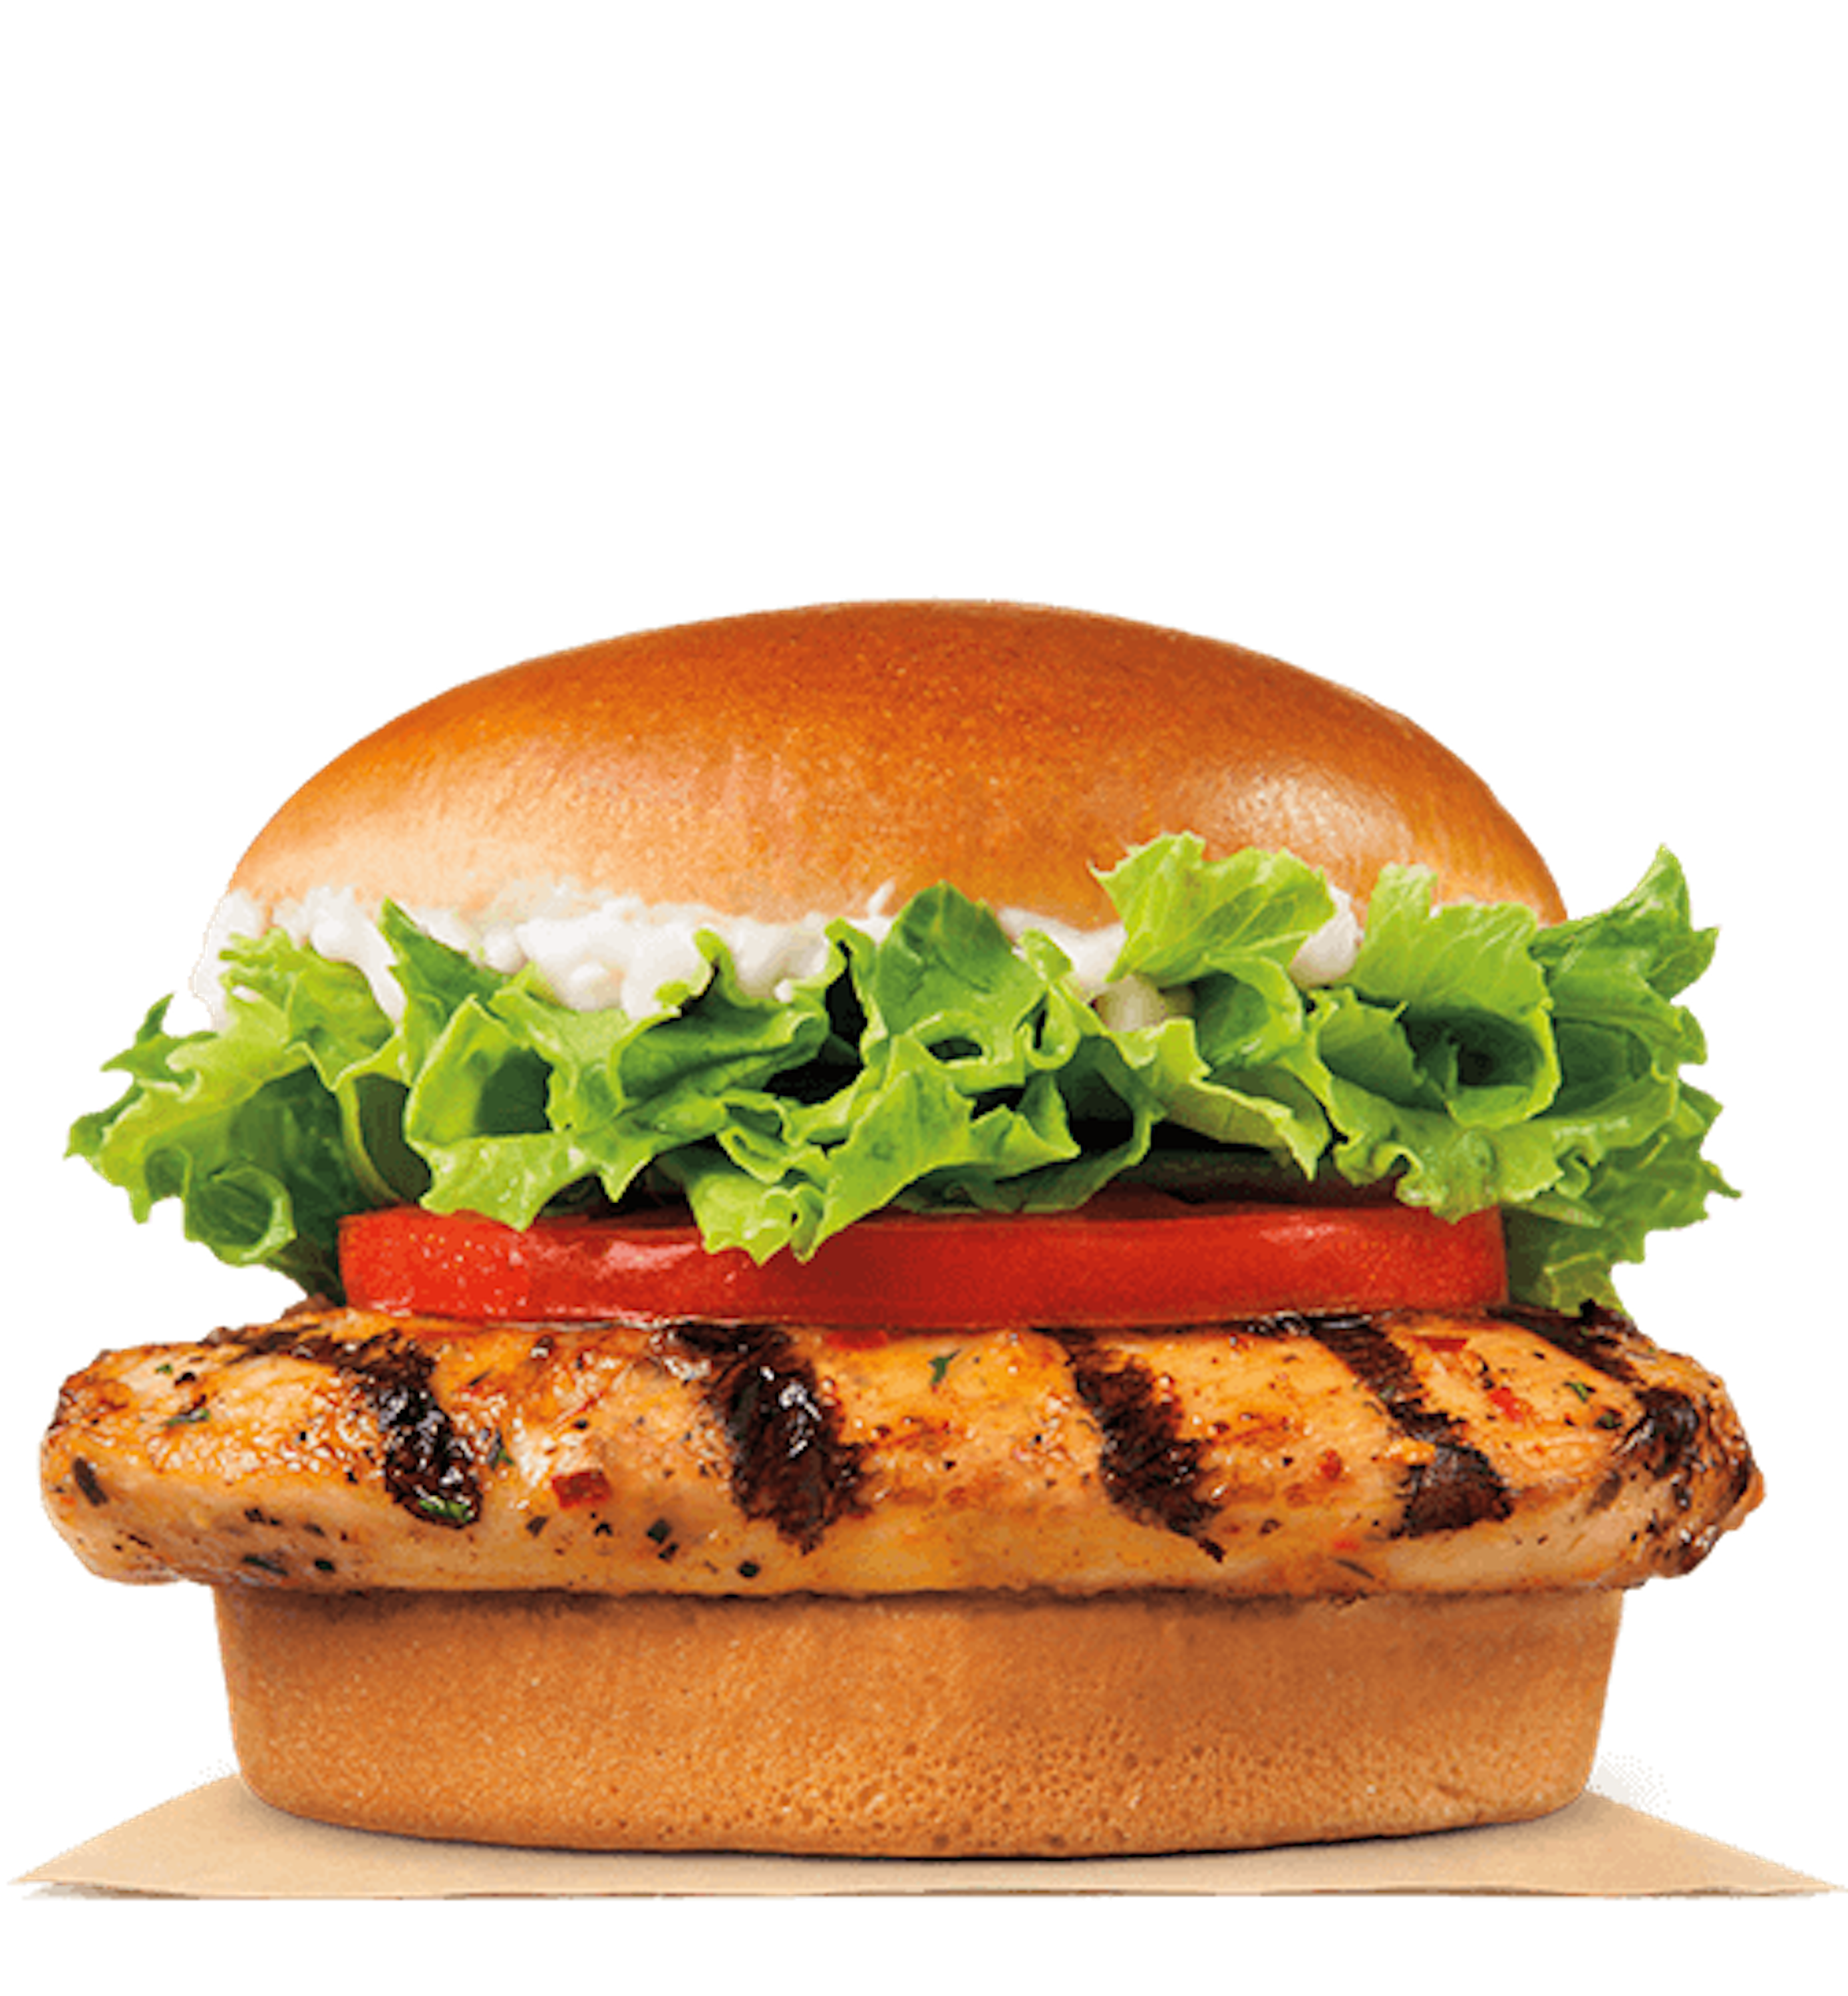 King Whopper Hamburger Fries French Burger Sandwiches PNG Image